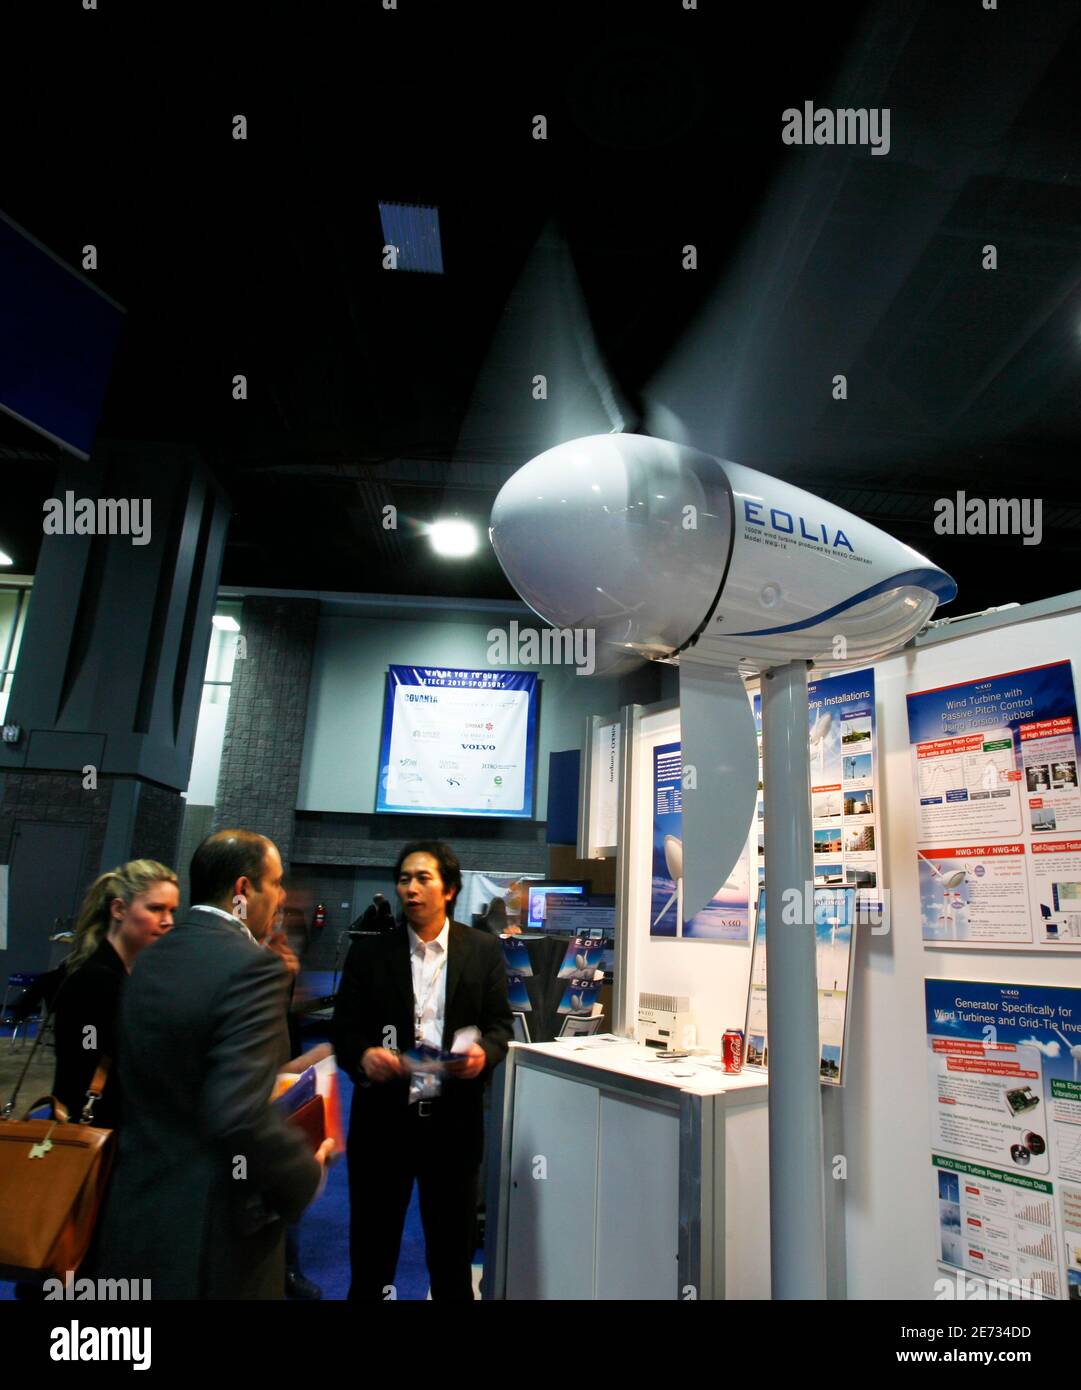 A wind turbine by the Nikko company of Japan is displayed at the 2010 Renewable Energy Technology Conference and Exhibition (RETECH 2010) in Washington, February 4, 2010. REUTERS/Hyungwon Kang    (UNITED STATES - Tags: ENERGY ANNIVERSARY BUSINESS SCI TECH) Stock Photo